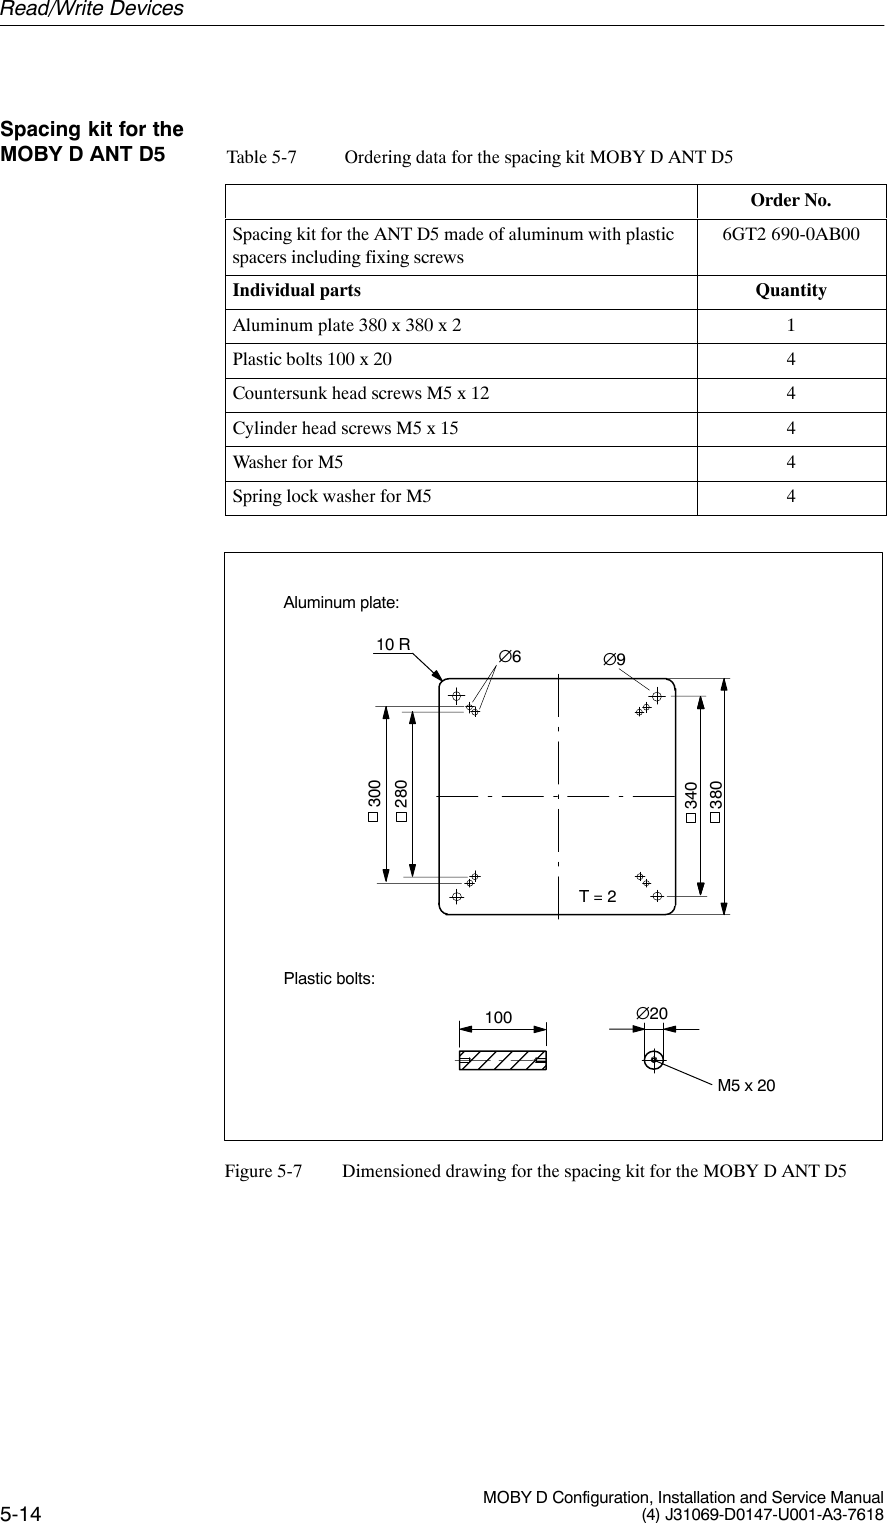 5-14 MOBY D Configuration, Installation and Service Manual(4) J31069-D0147-U001-A3-7618Table 5-7 Ordering data for the spacing kit MOBY D ANT D5Order No.Spacing kit for the ANT D5 made of aluminum with plasticspacers including fixing screws6GT2 690-0AB00Individual parts QuantityAluminum plate 380 x 380 x 2 1Plastic bolts 100 x 20 4Countersunk head screws M5 x 12 4Cylinder head screws M5 x 15 4Washer for M5 4Spring lock washer for M5 4380340300280∅6∅9∅20100M5 x 20Aluminum plate:Plastic bolts:T = 210 RFigure 5-7 Dimensioned drawing for the spacing kit for the MOBY D ANT D5Spacing kit for theMOBY D ANT D5Read/Write Devices